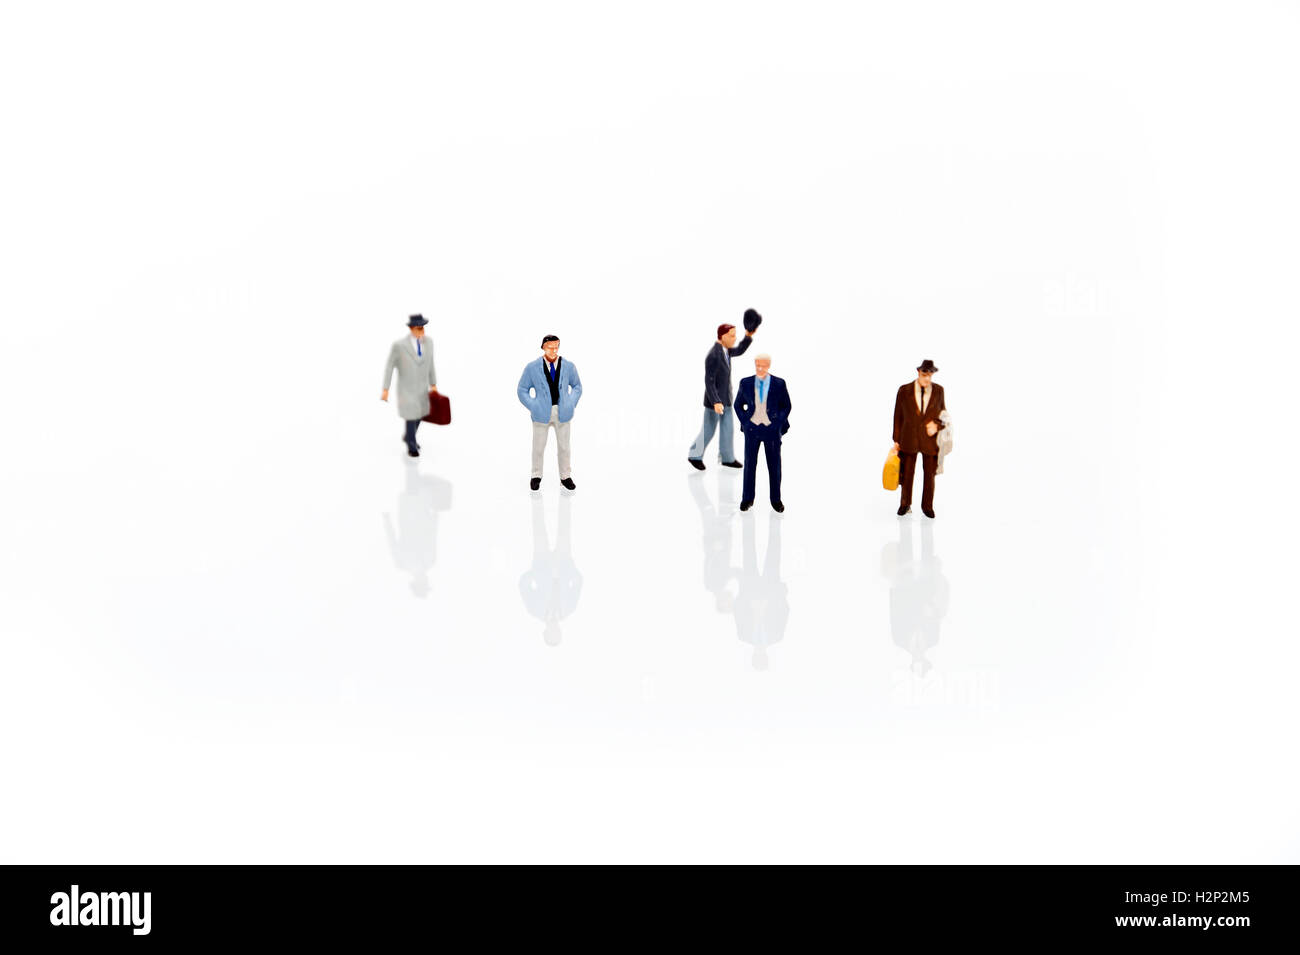 miniature man in one row Stock Photo